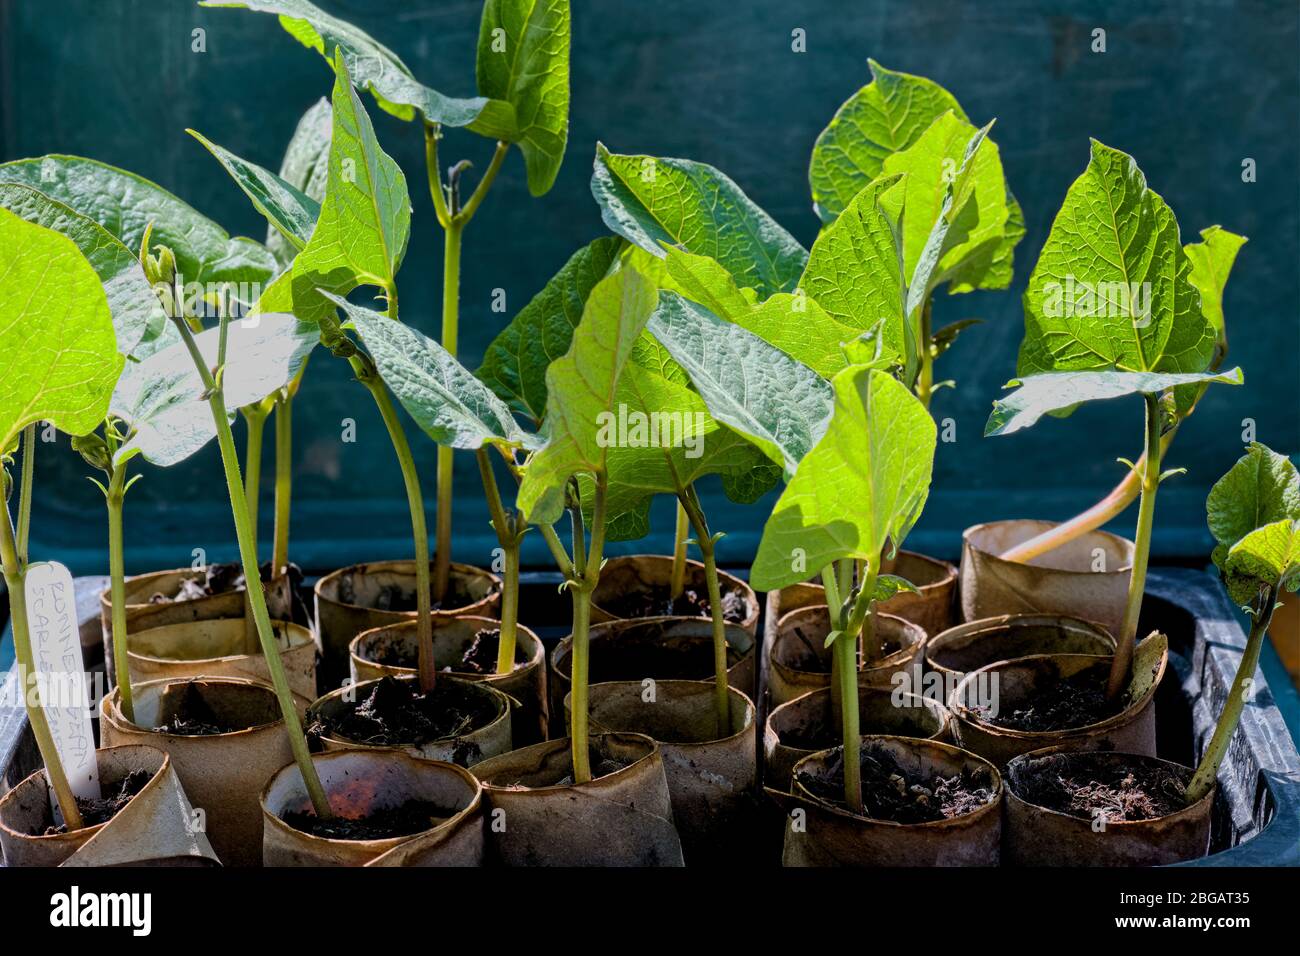 Growing from seeds in toilet roll centers used as alternative to plastic pots Stock Photo